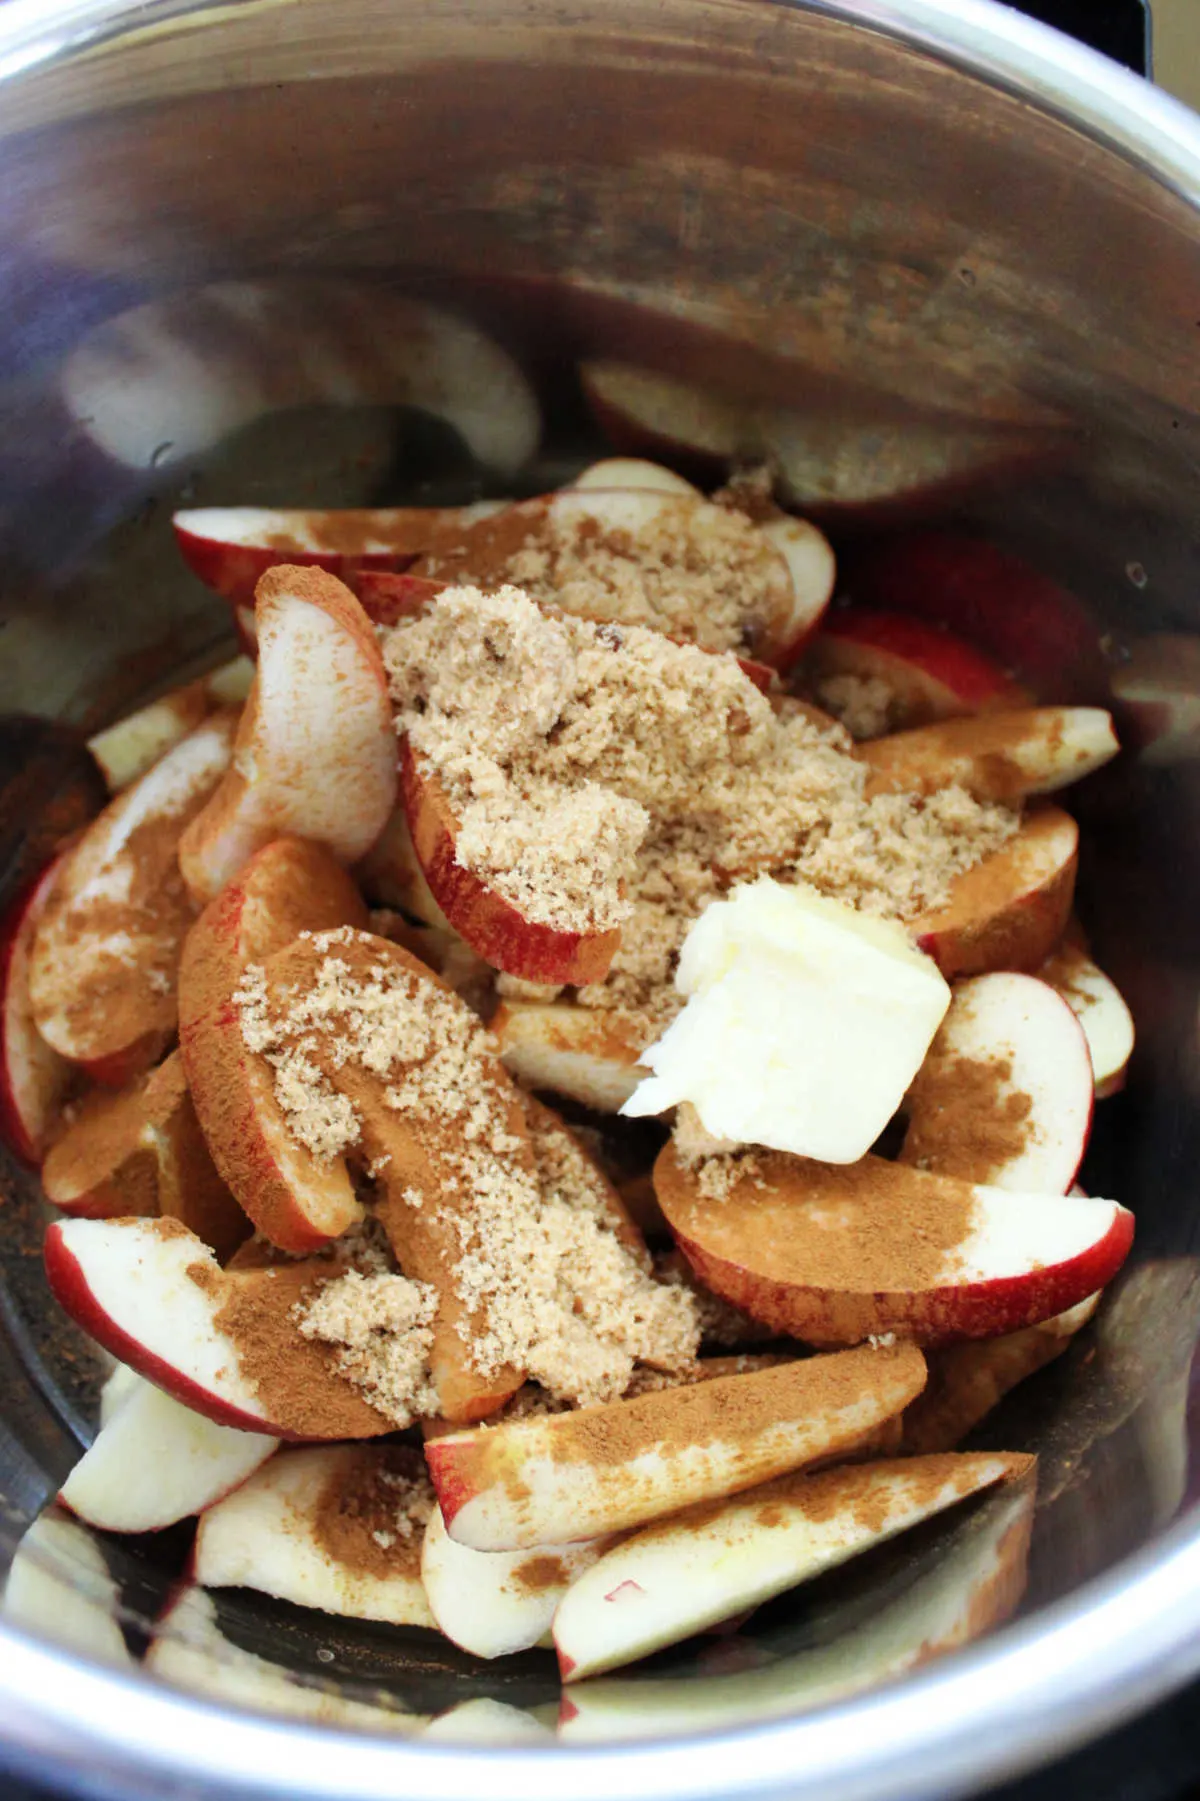 Slices of apples with brown sugar, cinnamon and butter in instant pot.